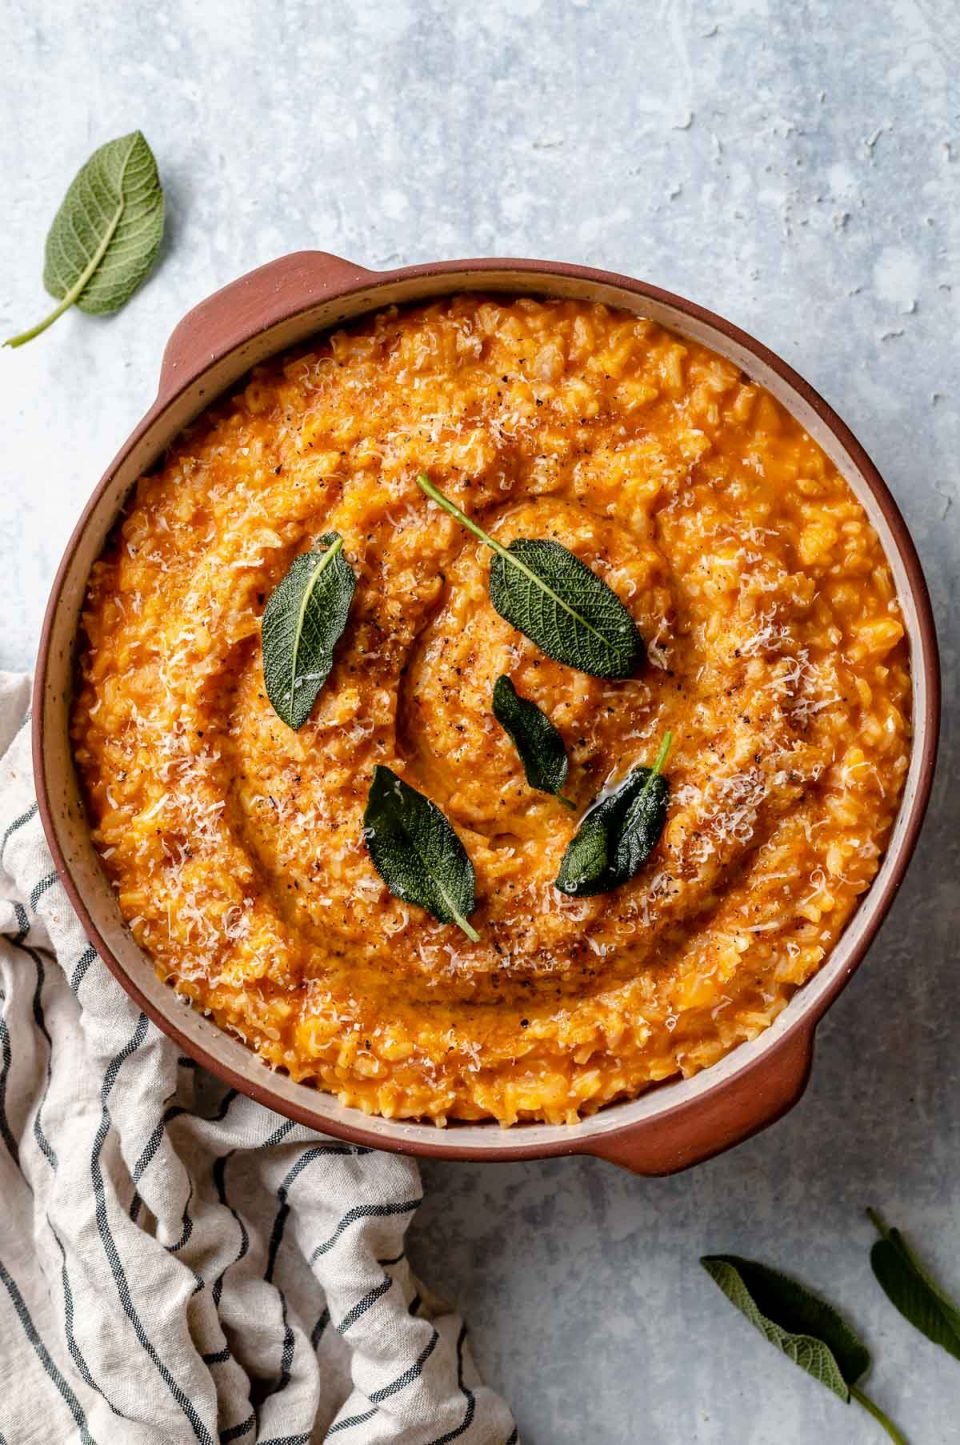 Creamy pumpkin risotto shown in a large terra cotta serving dish. The risotto is topped with crispy fried sage leaves & finely grated parmesan. The dish sits atop a light blue surface, next to a striped linen napkin & some fresh sage leaves.